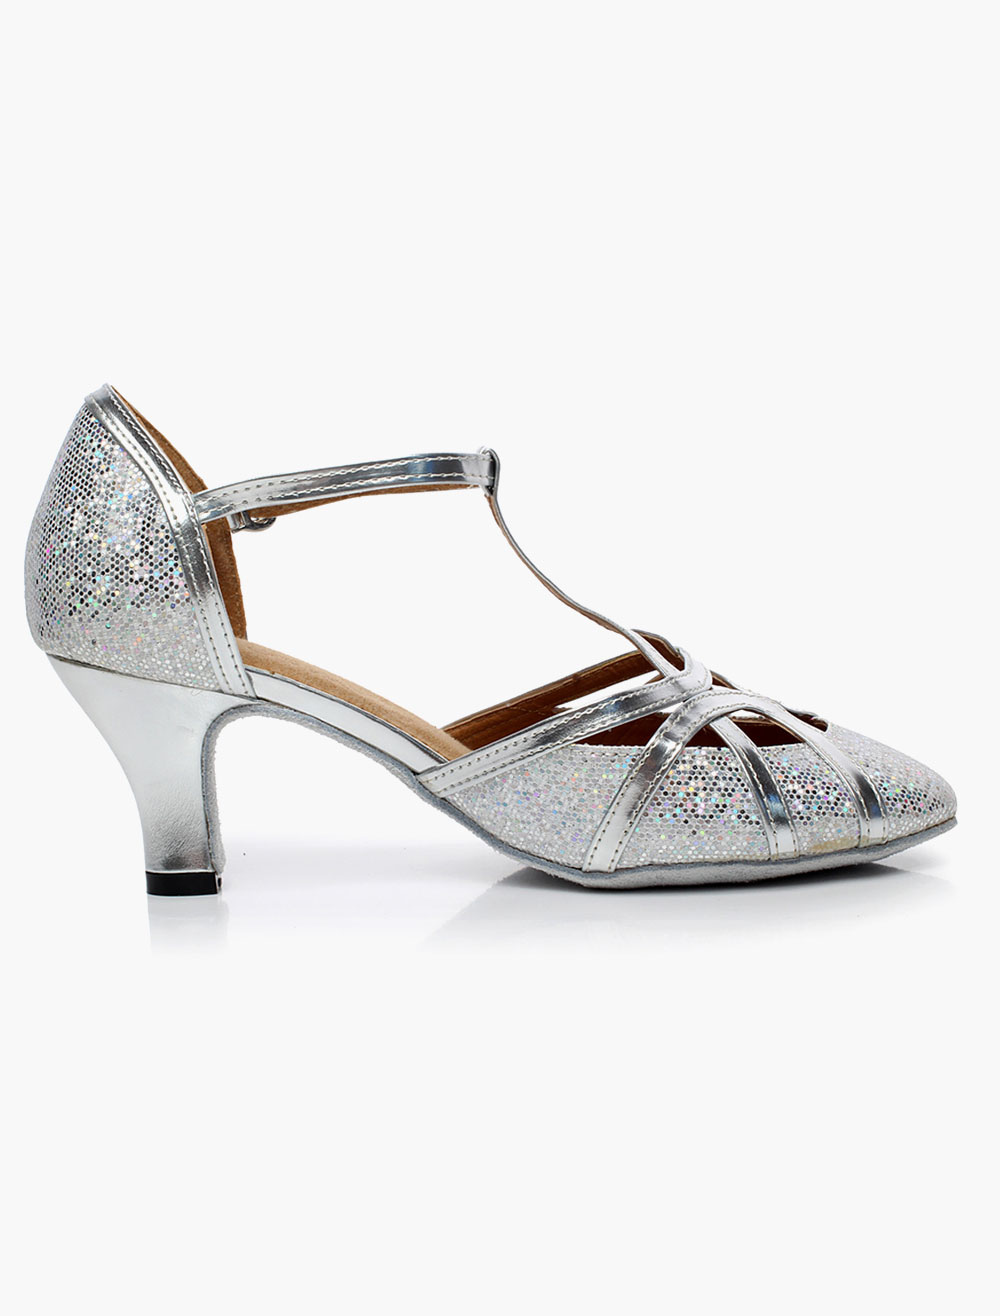 Silver Latin Dance Sandals Pointed Toe T Type 1920s Vintage Shoes ...